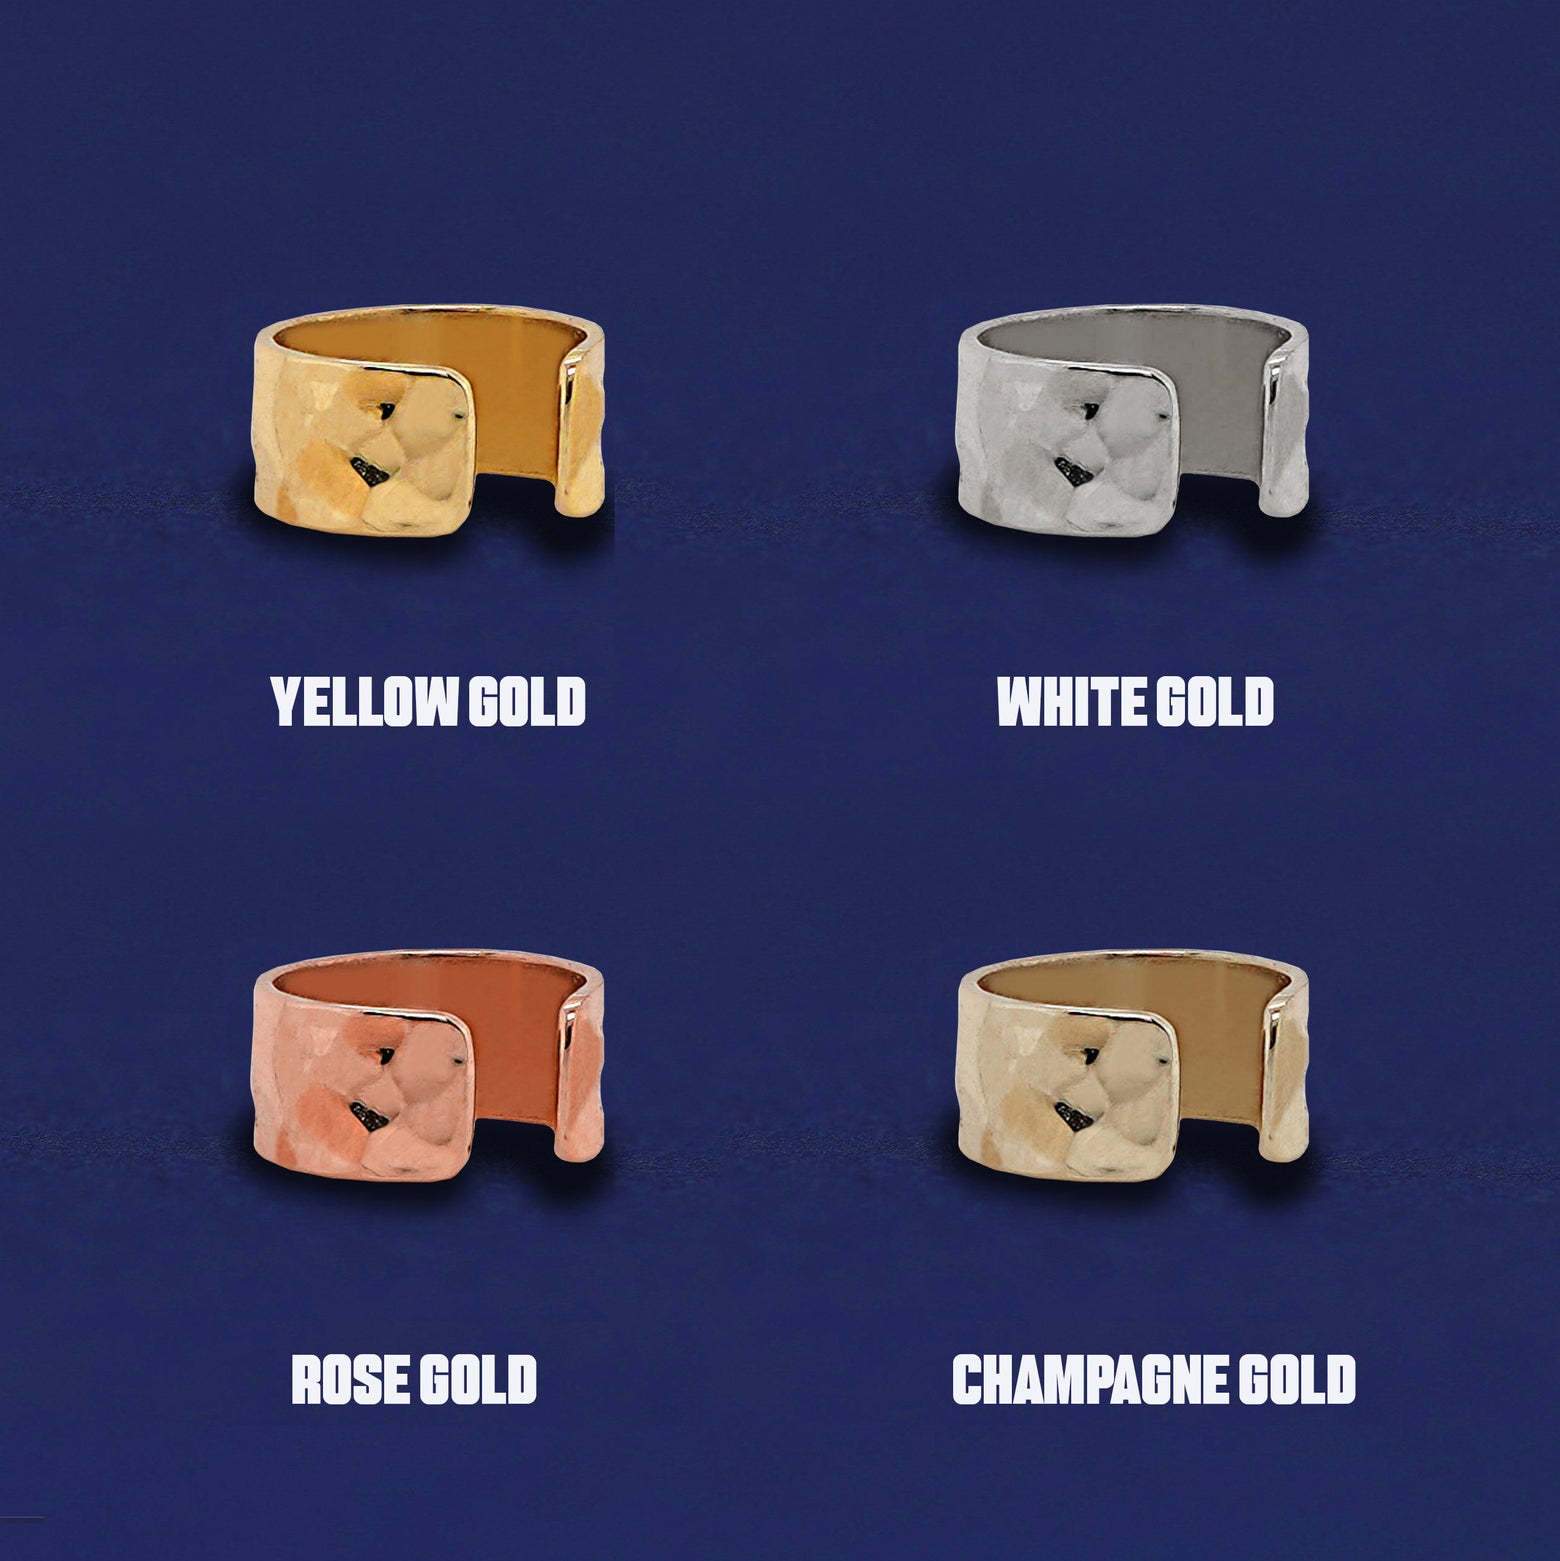 Four versions of the Hammered Thick Cuff shown in options of yellow, white, rose and champagne gold